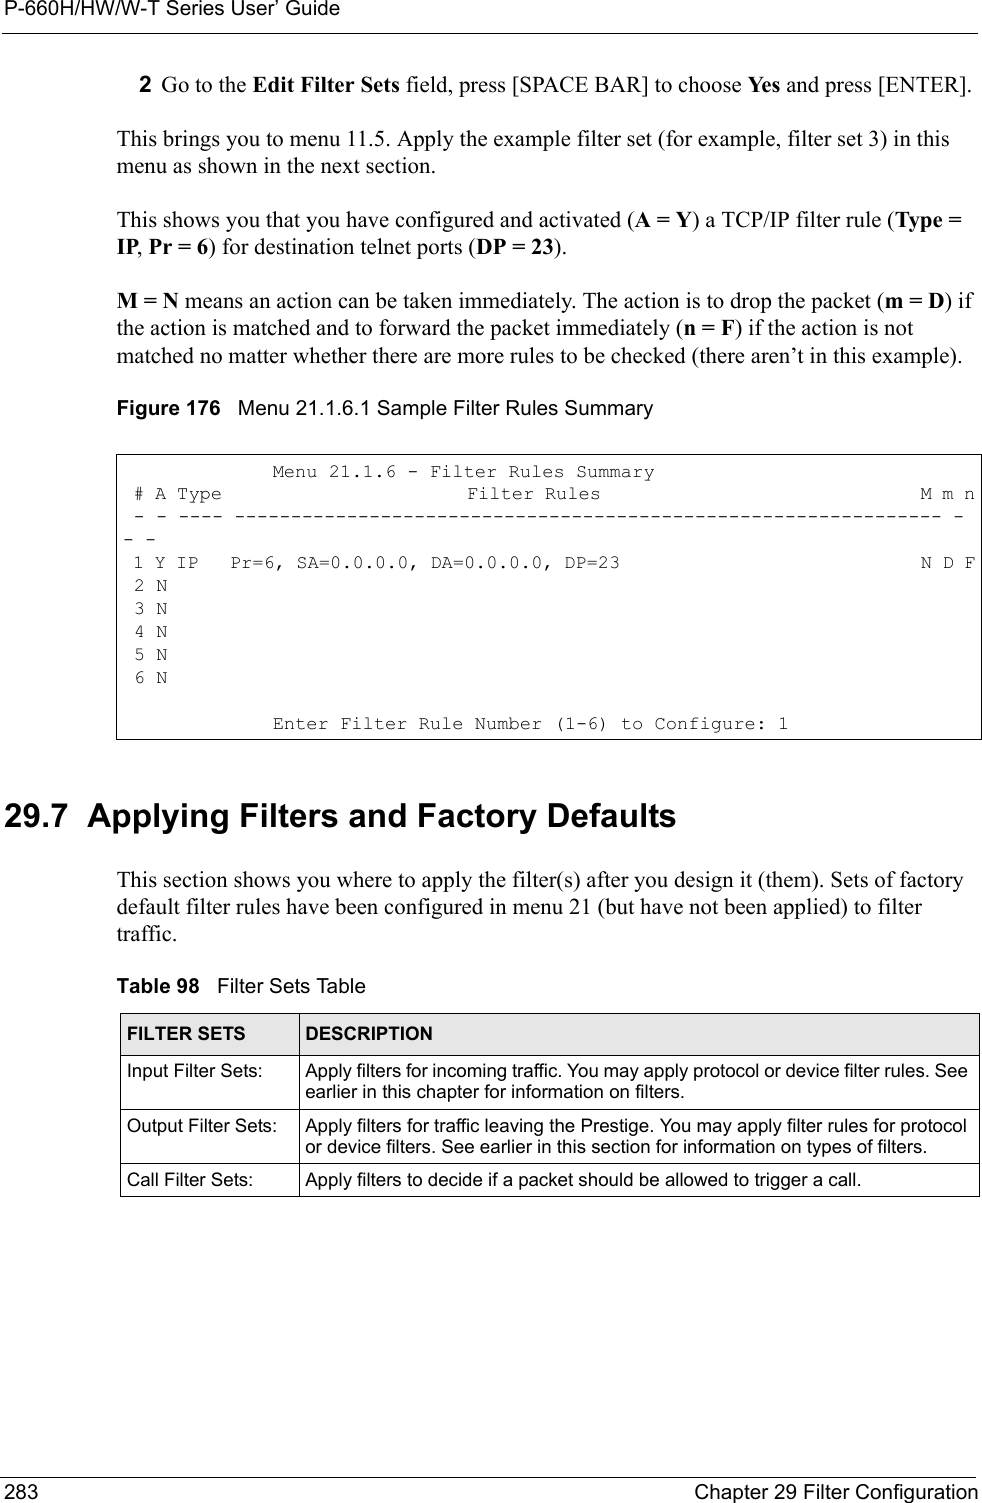 P-660H/HW/W-T Series User’ Guide283 Chapter 29 Filter Configuration2Go to the Edit Filter Sets field, press [SPACE BAR] to choose Ye s  and press [ENTER].This brings you to menu 11.5. Apply the example filter set (for example, filter set 3) in this menu as shown in the next section.This shows you that you have configured and activated (A = Y) a TCP/IP filter rule (Type = IP, Pr = 6) for destination telnet ports (DP = 23).M = N means an action can be taken immediately. The action is to drop the packet (m = D) if the action is matched and to forward the packet immediately (n = F) if the action is not matched no matter whether there are more rules to be checked (there aren’t in this example).Figure 176   Menu 21.1.6.1 Sample Filter Rules Summary29.7  Applying Filters and Factory DefaultsThis section shows you where to apply the filter(s) after you design it (them). Sets of factory default filter rules have been configured in menu 21 (but have not been applied) to filter traffic.Menu 21.1.6 - Filter Rules Summary # A Type                       Filter Rules                              M m n - - ---- --------------------------------------------------------------- - - - 1 Y IP   Pr=6, SA=0.0.0.0, DA=0.0.0.0, DP=23                             N D F 2 N 3 N 4 N 5 N 6 NEnter Filter Rule Number (1-6) to Configure: 1Table 98   Filter Sets TableFILTER SETS DESCRIPTIONInput Filter Sets: Apply filters for incoming traffic. You may apply protocol or device filter rules. See earlier in this chapter for information on filters. Output Filter Sets: Apply filters for traffic leaving the Prestige. You may apply filter rules for protocol or device filters. See earlier in this section for information on types of filters.Call Filter Sets: Apply filters to decide if a packet should be allowed to trigger a call.